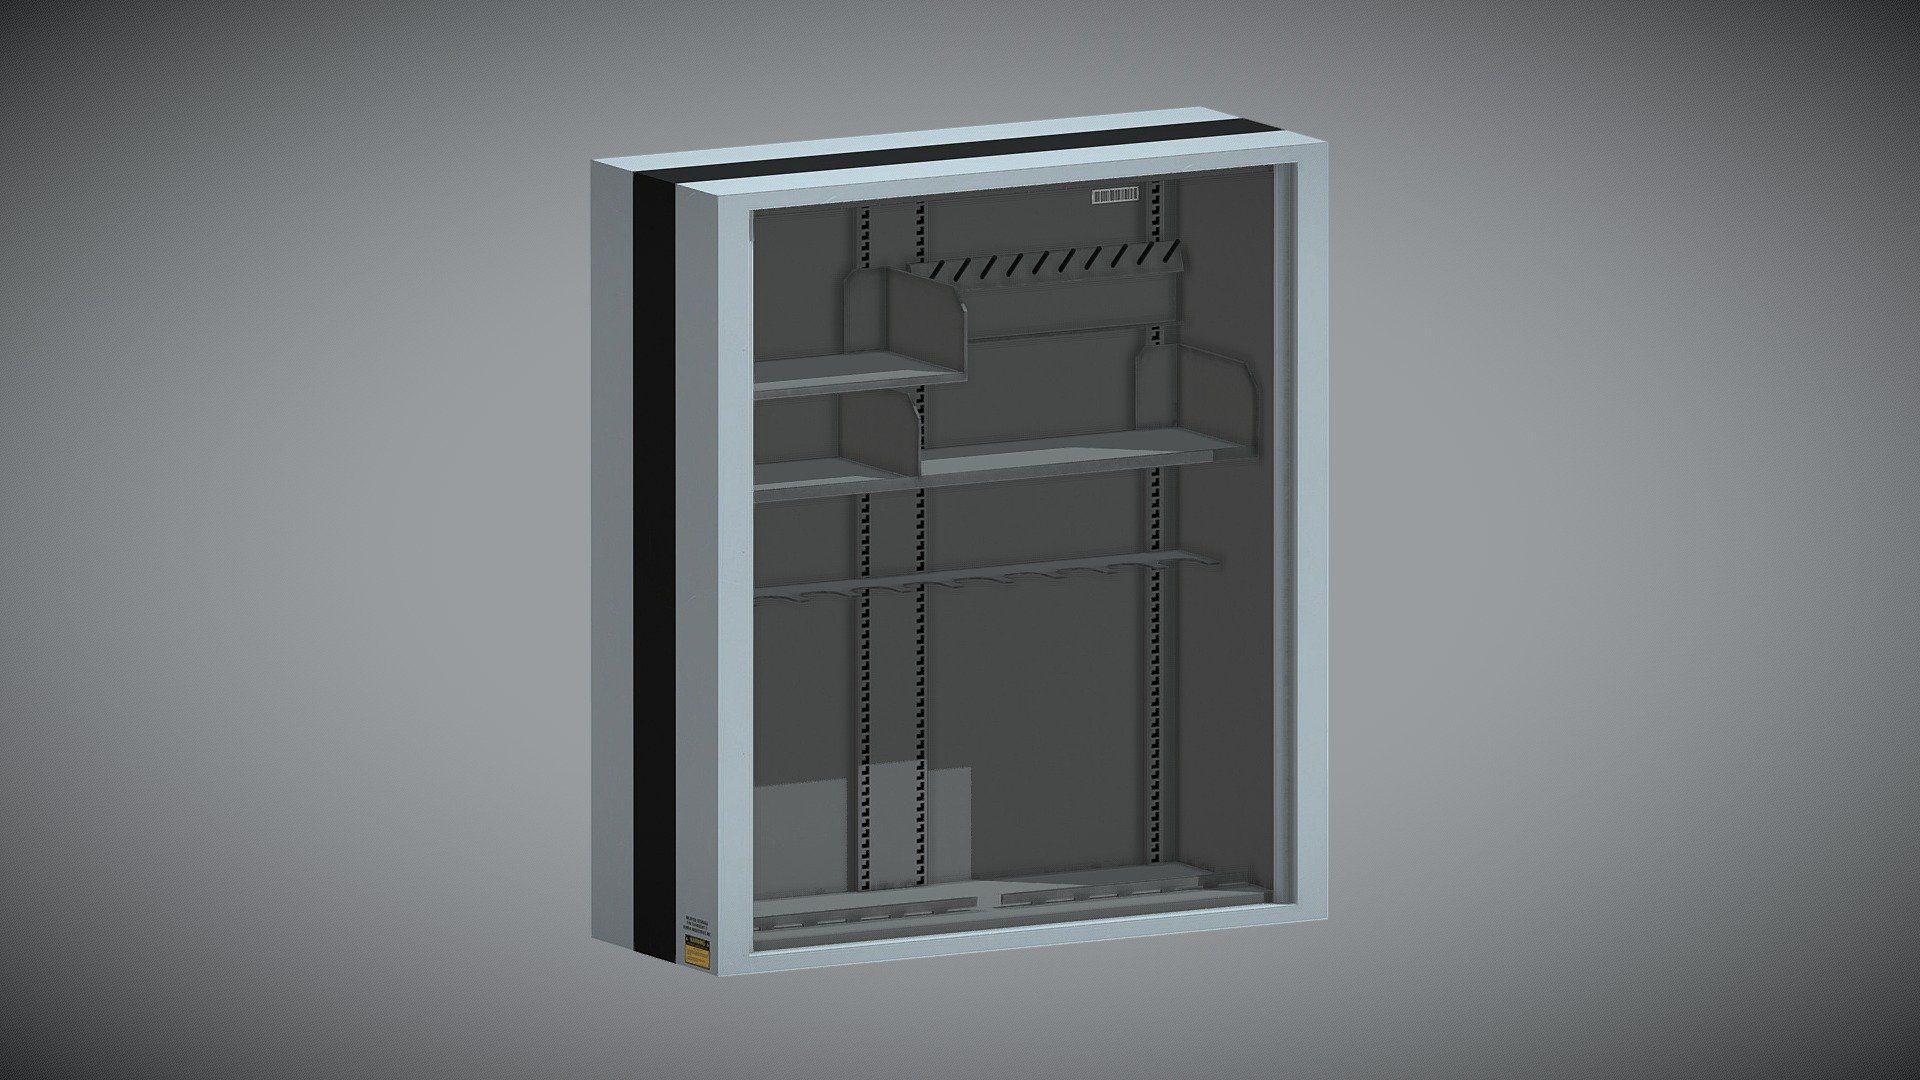 Sci-Fi Furniture Pack AAA: Shelving Unit F (openable)
Textures: 2048x2048, diffuse, normal, specular.

Part of the Sci-Fi Furniture Pack AAA. Available on Asset Store.

About Sci-Fi Furniture Pack AAA:

Complete kit of 18 furniture and interior design items for sci-fi level, science lab, cyberpunk or spaceship environment of AAA-quality.

Most of the models can be colored, opened-closed, disassembled for furniture components and recombined for full customization in a game engine.

Gameready lowpolies baked with love from cinematic highpolies. Each model contain textures: 2048x2048, diffuse, normal, specular. Concept design by of the top AAA artists. Production cost over $10,000. Make your own level design on Unity competitive to Deus Ex: Human Revolution, Deus Ex: Mankind Divided, Syndicate 2012, Mass Effect and Star Citizen benchmarks!

Preview for each of the items attached via Sketchfab (rotate, zoom, enjoy).

（╹◡╹） - Sci-Fi Furniture Pack AAA: Shelving Unit F - Buy Royalty Free 3D model by blackcloudstudios 3d model